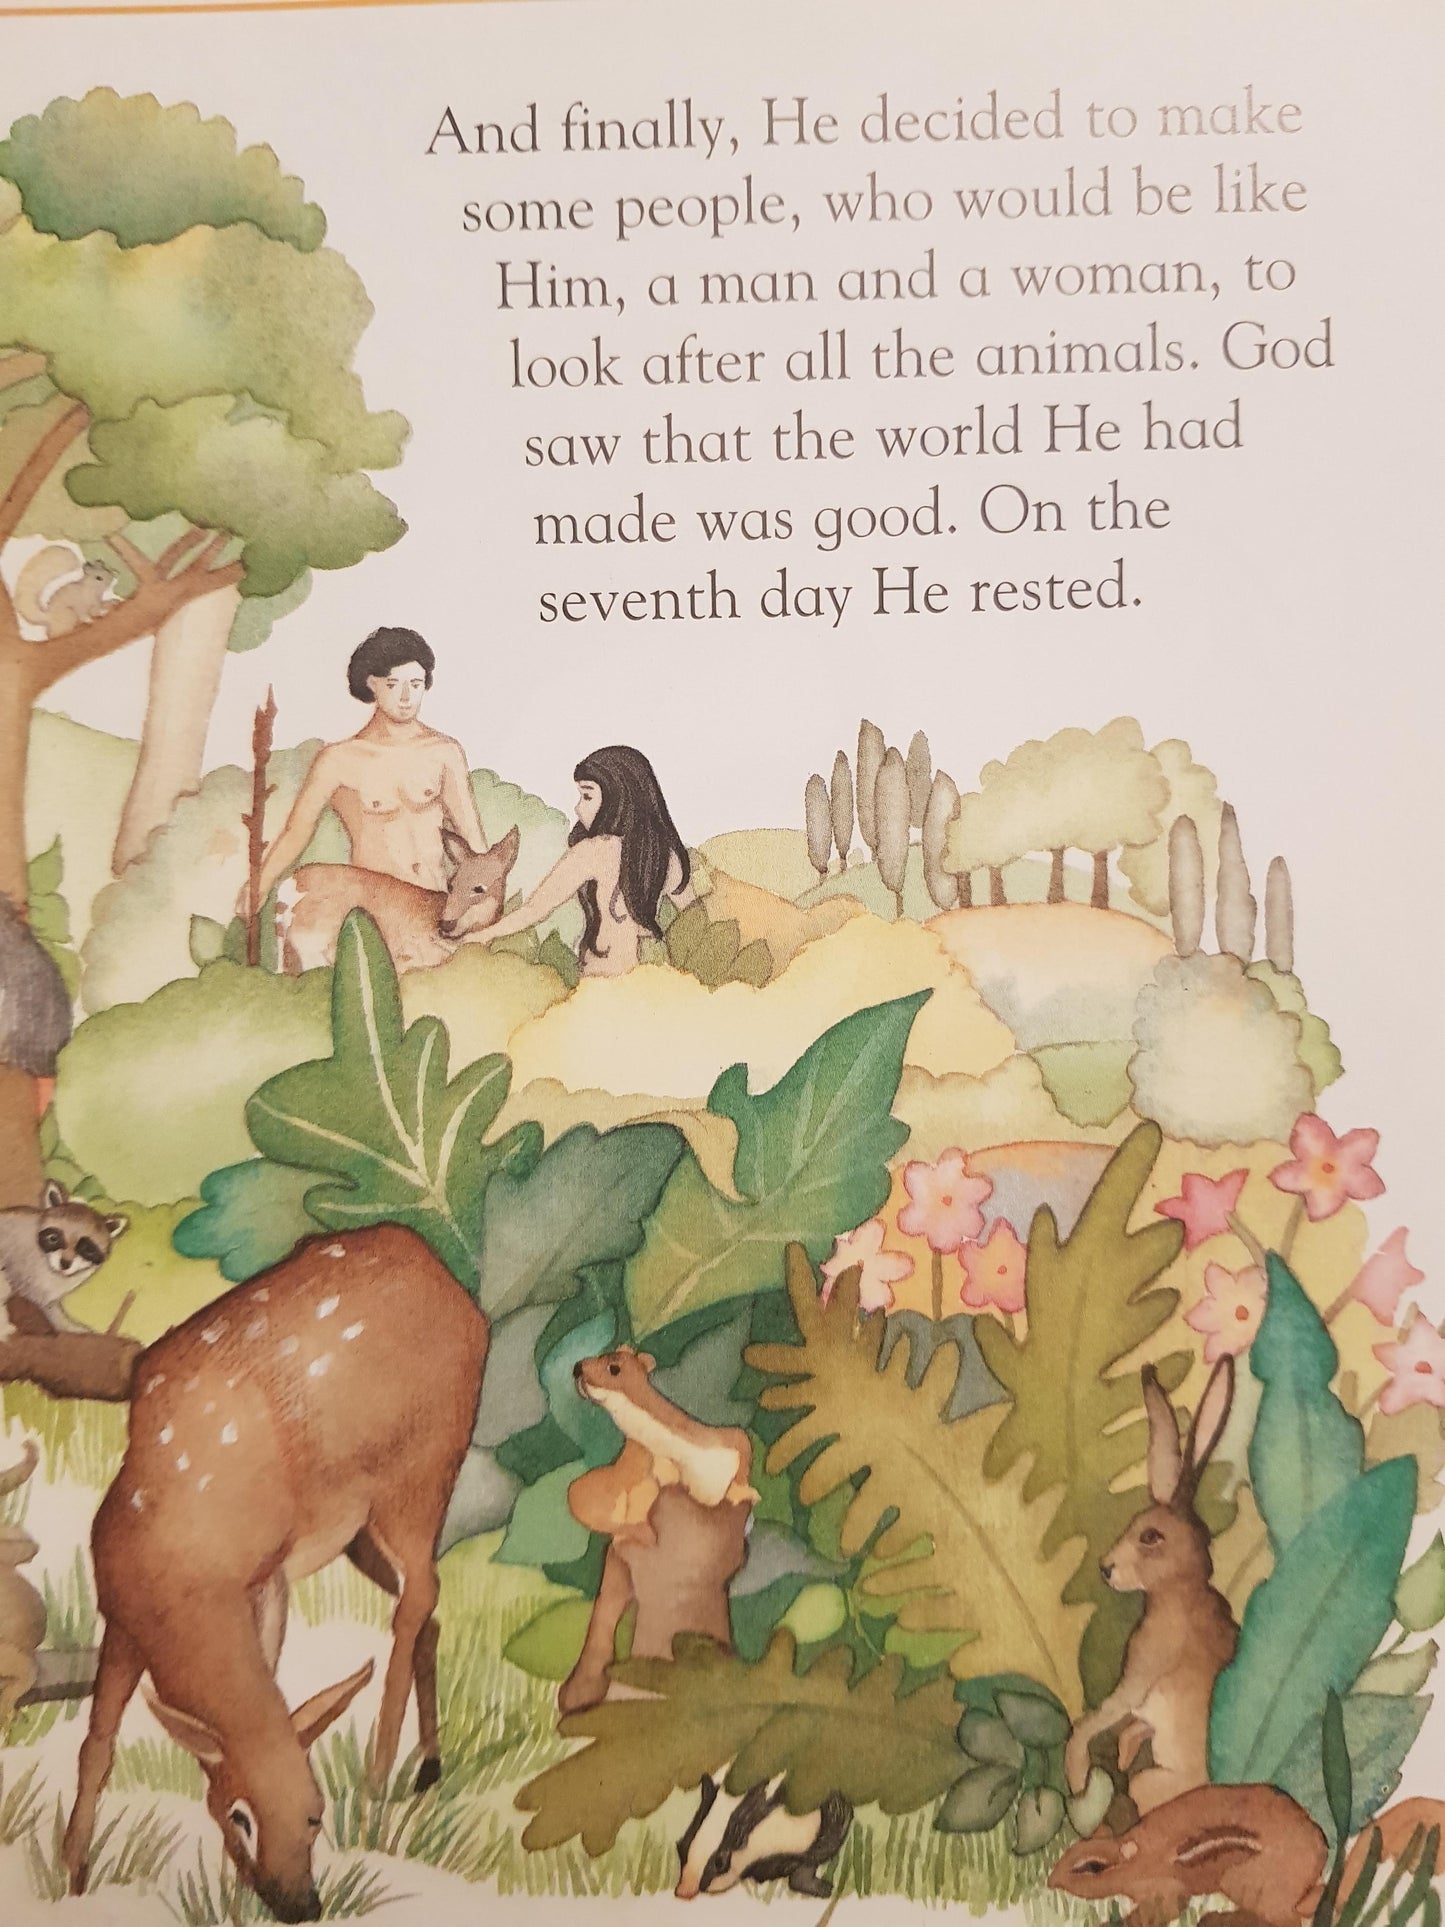 A First Bible story Book Like New Recuddles.ch  (6172264988857)